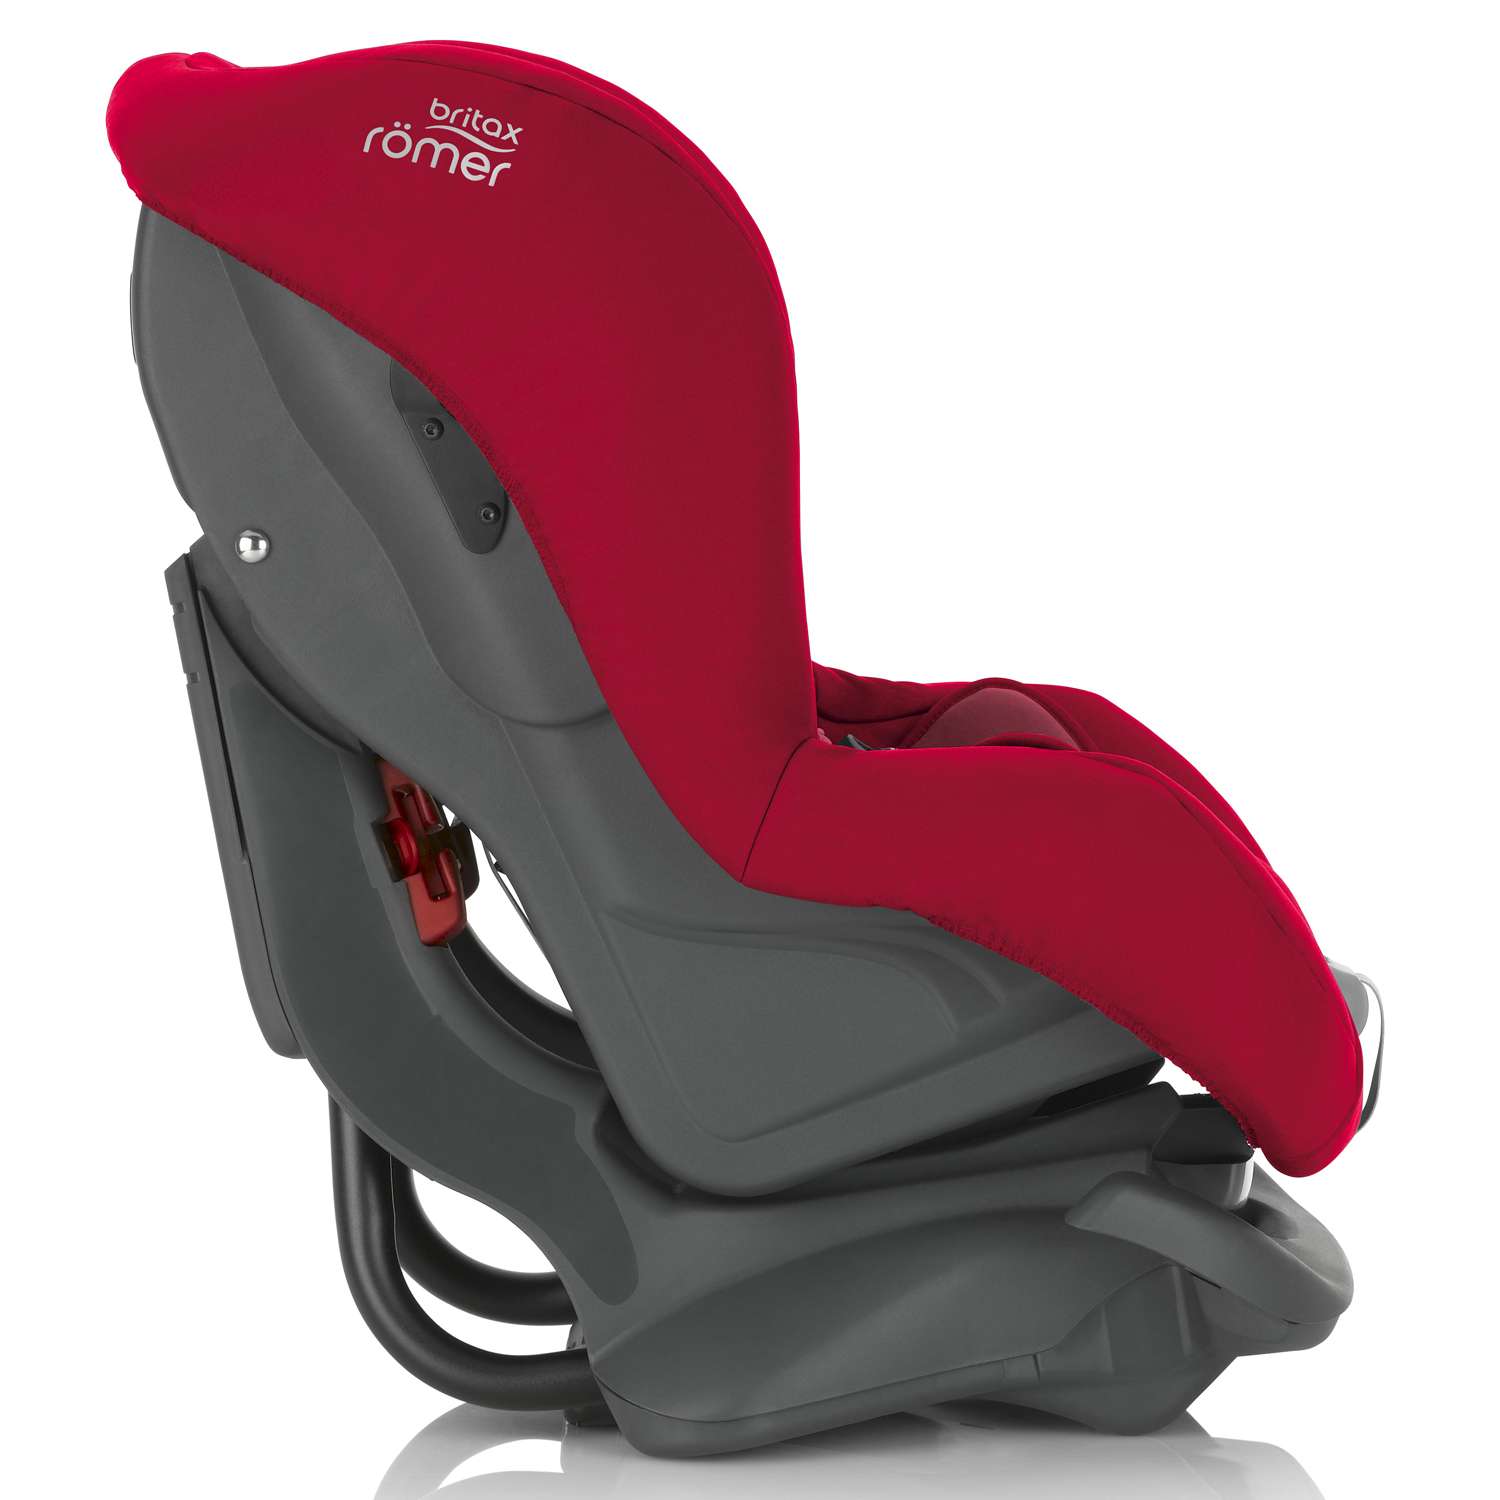 Автокресло Britax Roemer First Class Plus Flame Red - фото 2